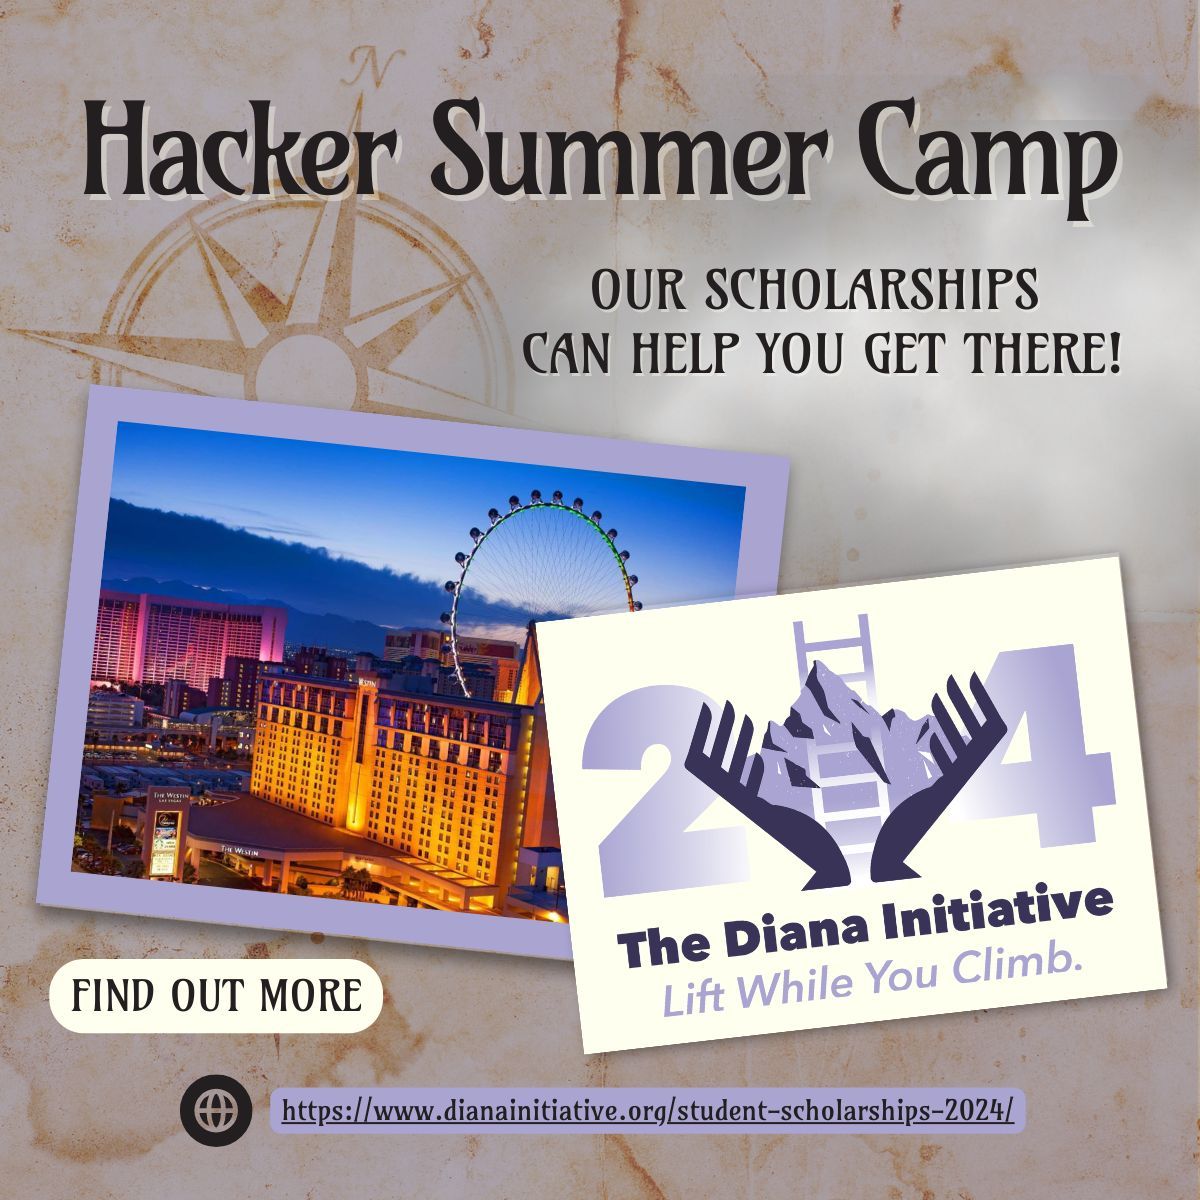 Are you a student interested in info/cyber security? Apply for our scholarship and you could be awarded financial aid and tickets to attend multiple infosec conferences in Las Vegas the first week of August! apply by 19 May! buff.ly/3vwG9RZ #TDI2024 #LiftWhileYouClimb